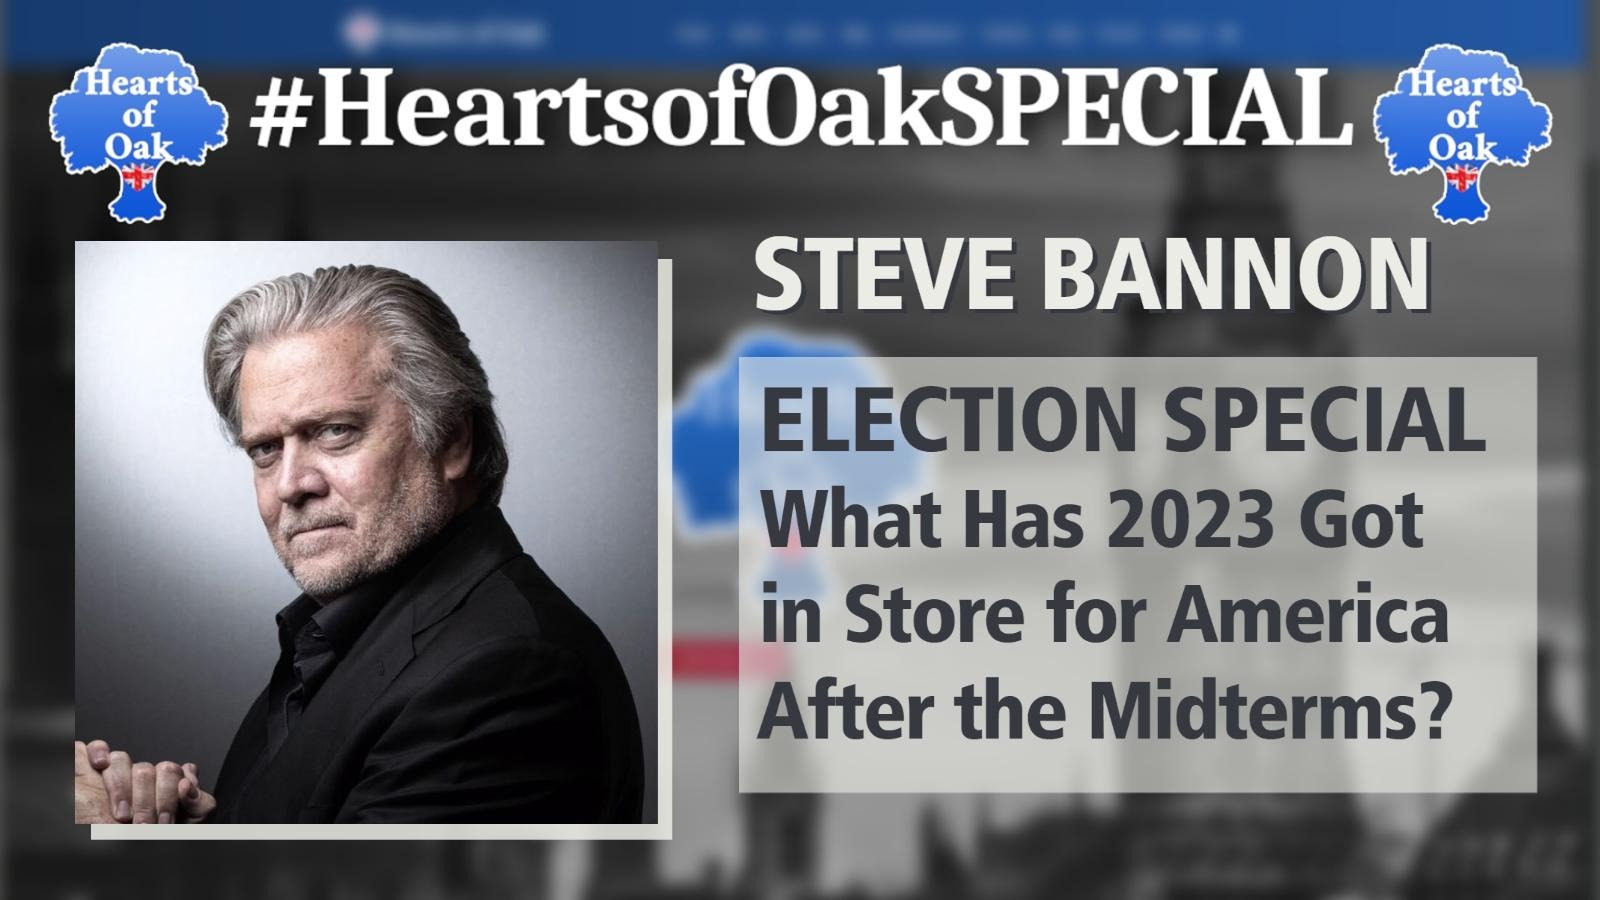 Steve Bannon – ELECTION SPECIAL: What Has 2023 Got in Store for America After the Midterms?